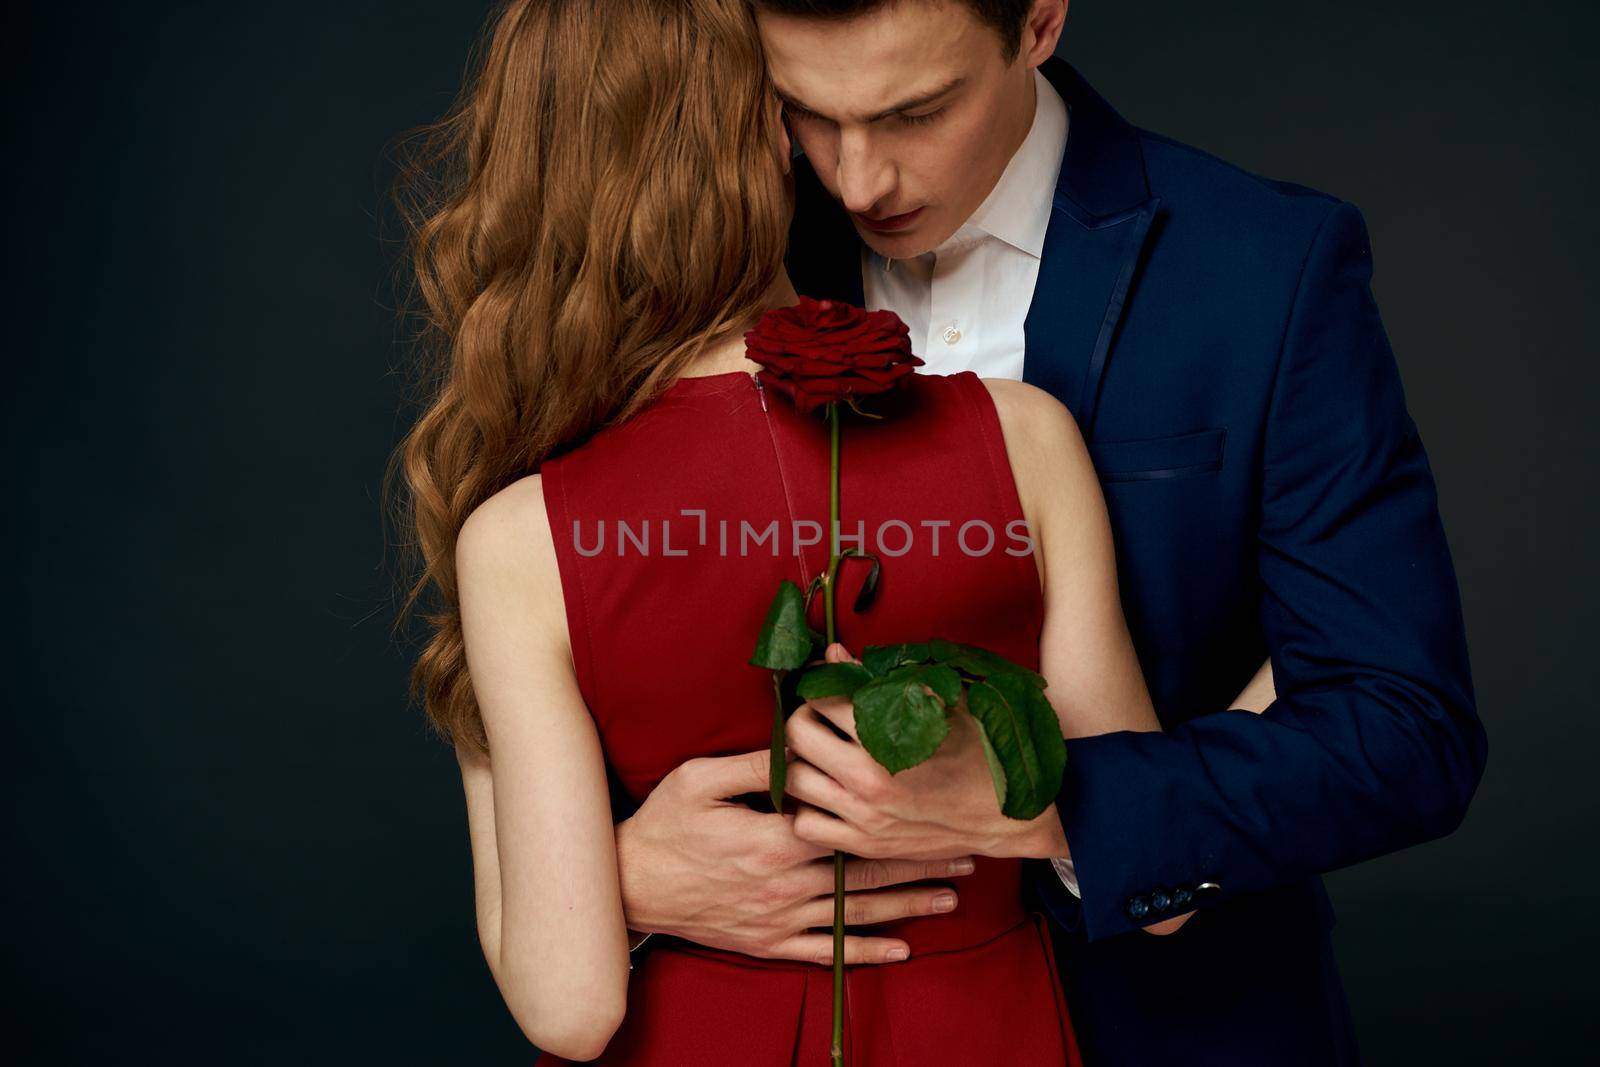 Young couple embrace romance rose tree charm luxury. High quality photo